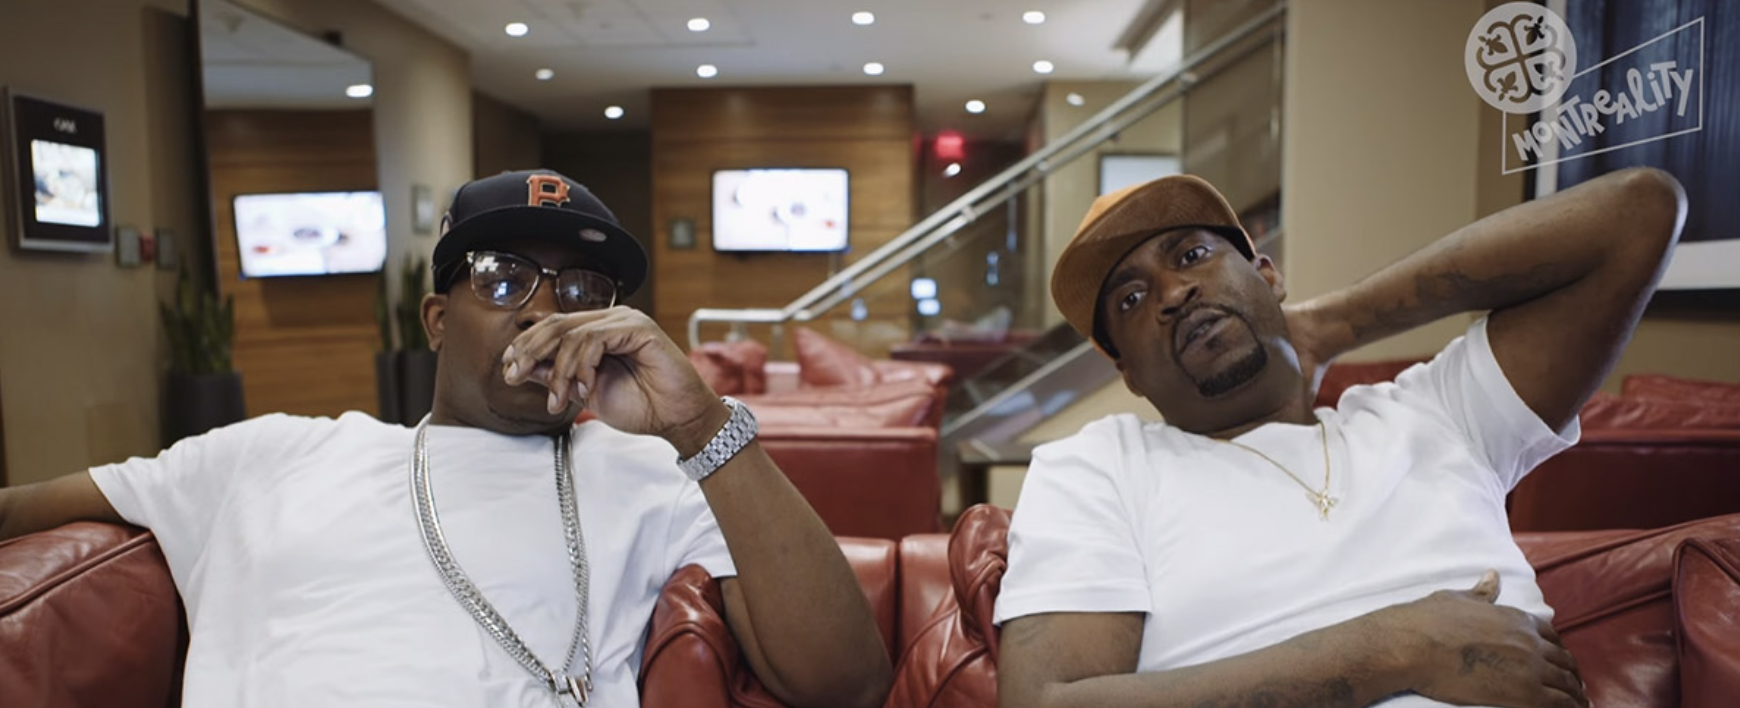 [WATCH] Tony Yayo And Uncle Murda Argue About Who Has The Best Career On The Silver Screen